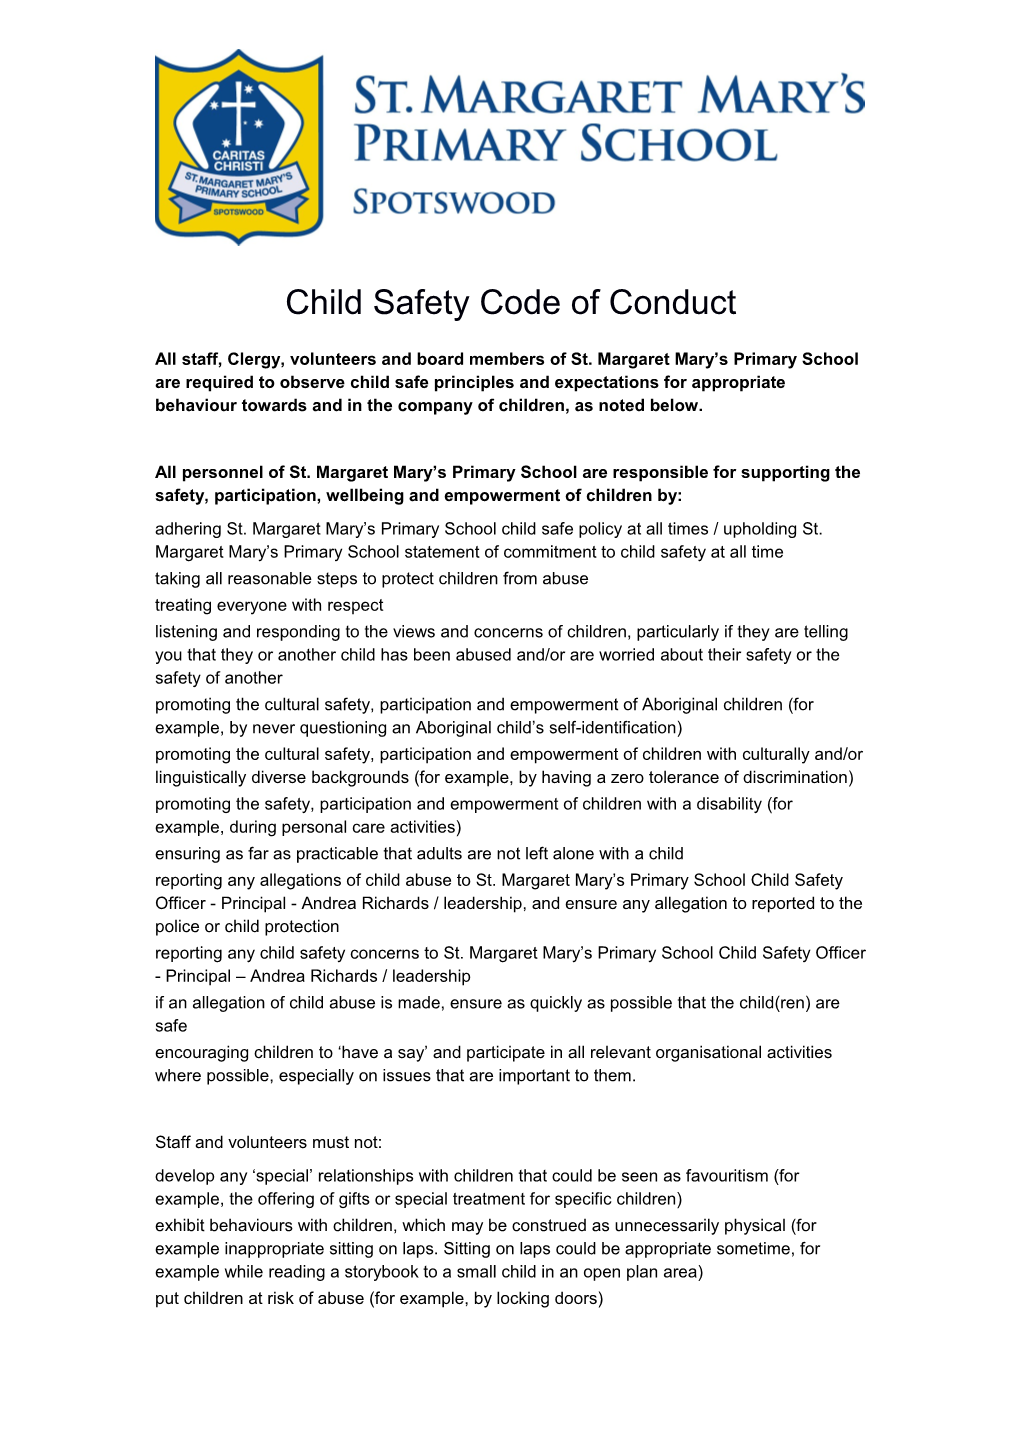 Child Safety Code of Conduct